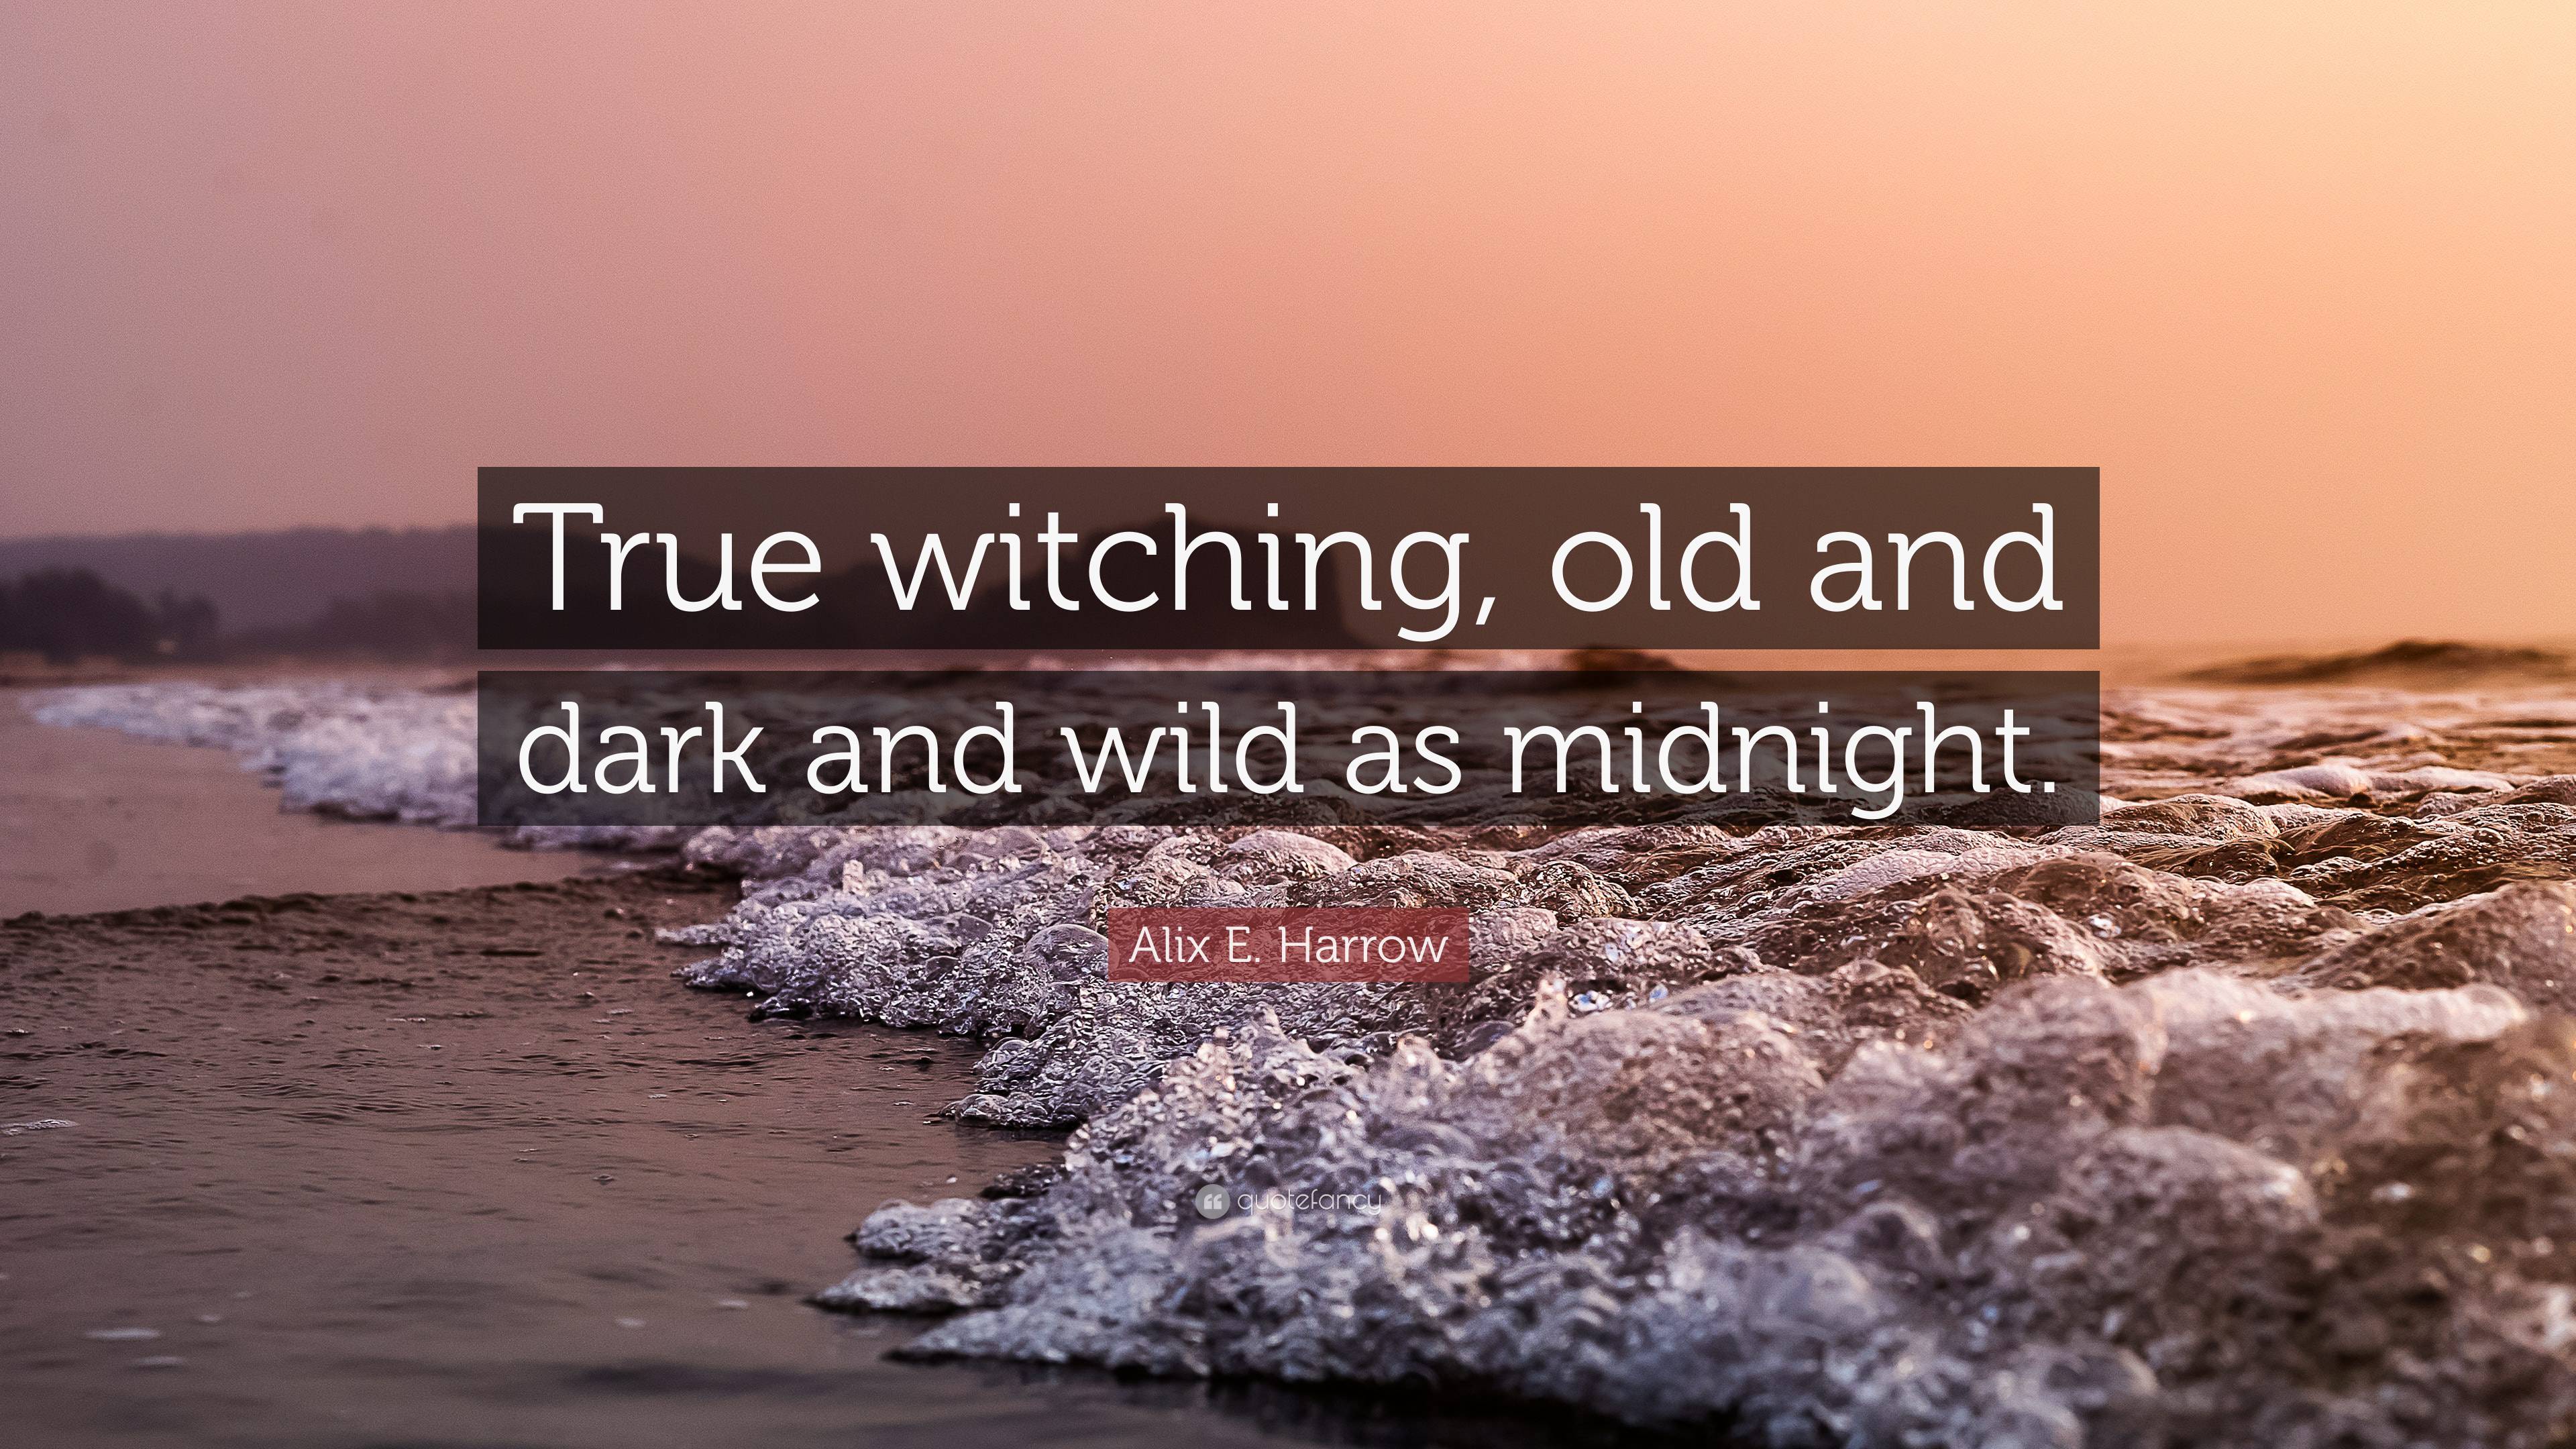 Alix E. Harrow Quote: “True witching, old and dark and wild as midnight.”